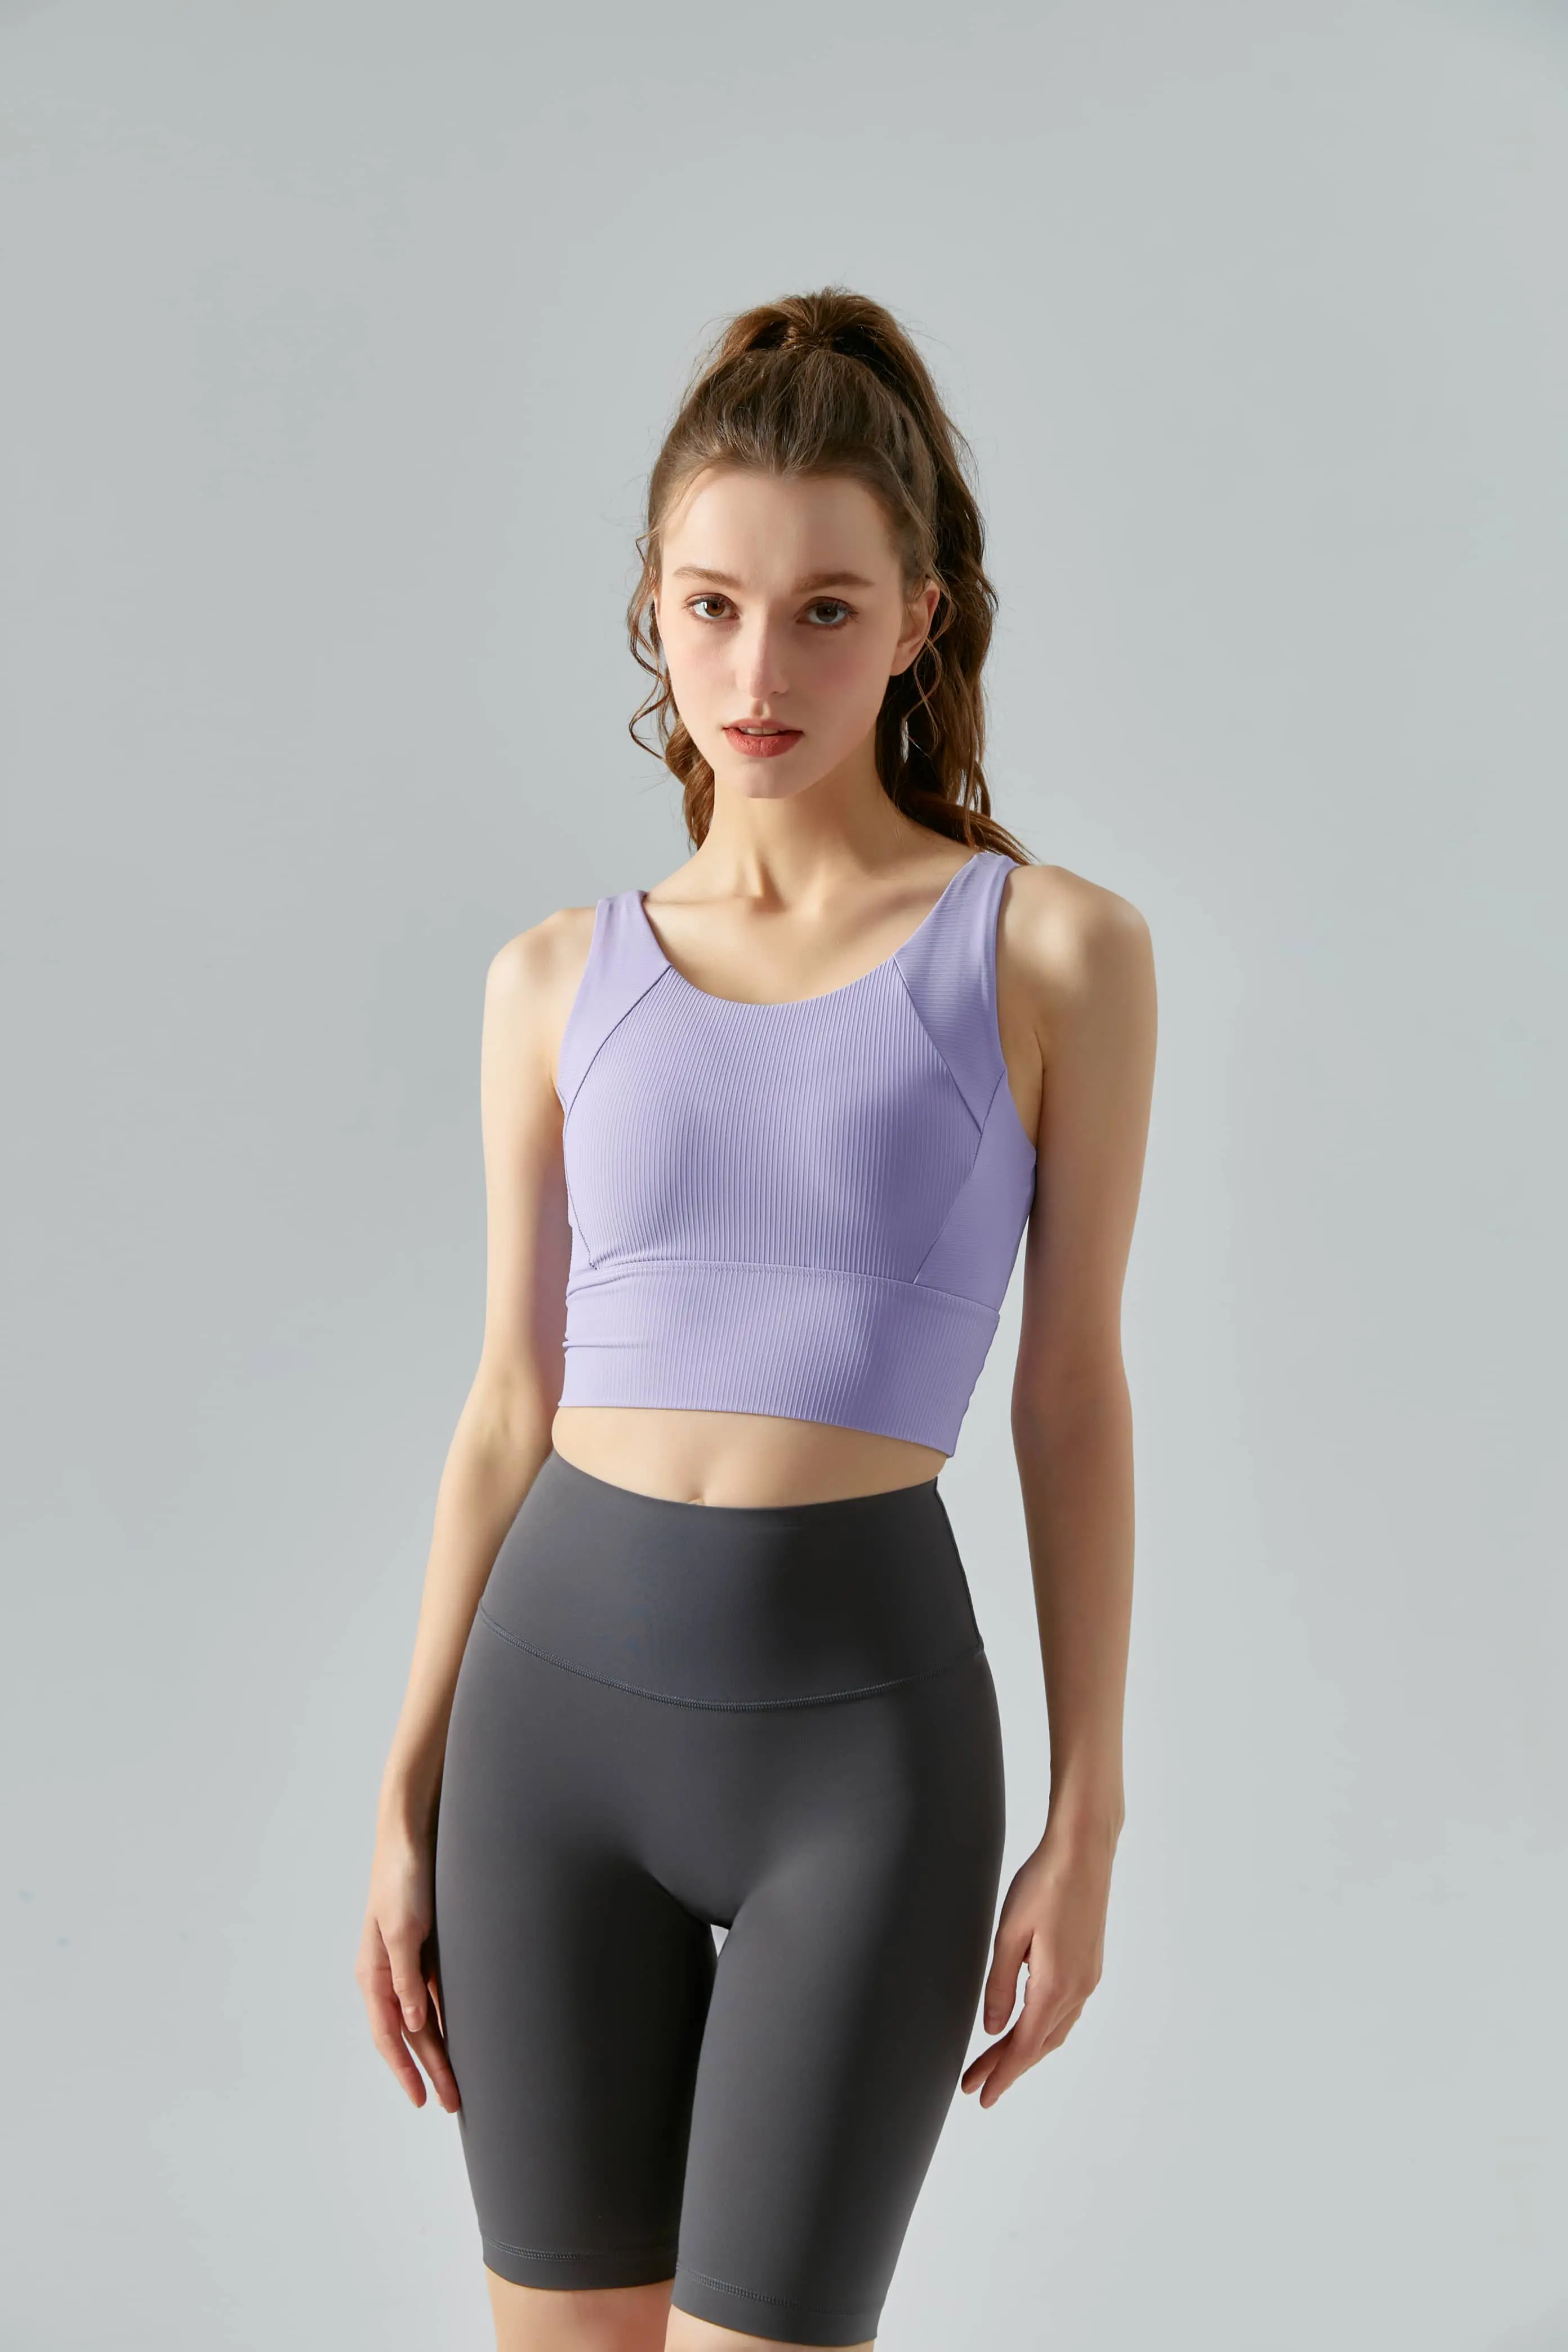 2033 Lulu Womens Yoga Crop Top Classic Anita Sports Bra And Vest For  Fitness, Gym, And Sports From Gogo888999, $37.13